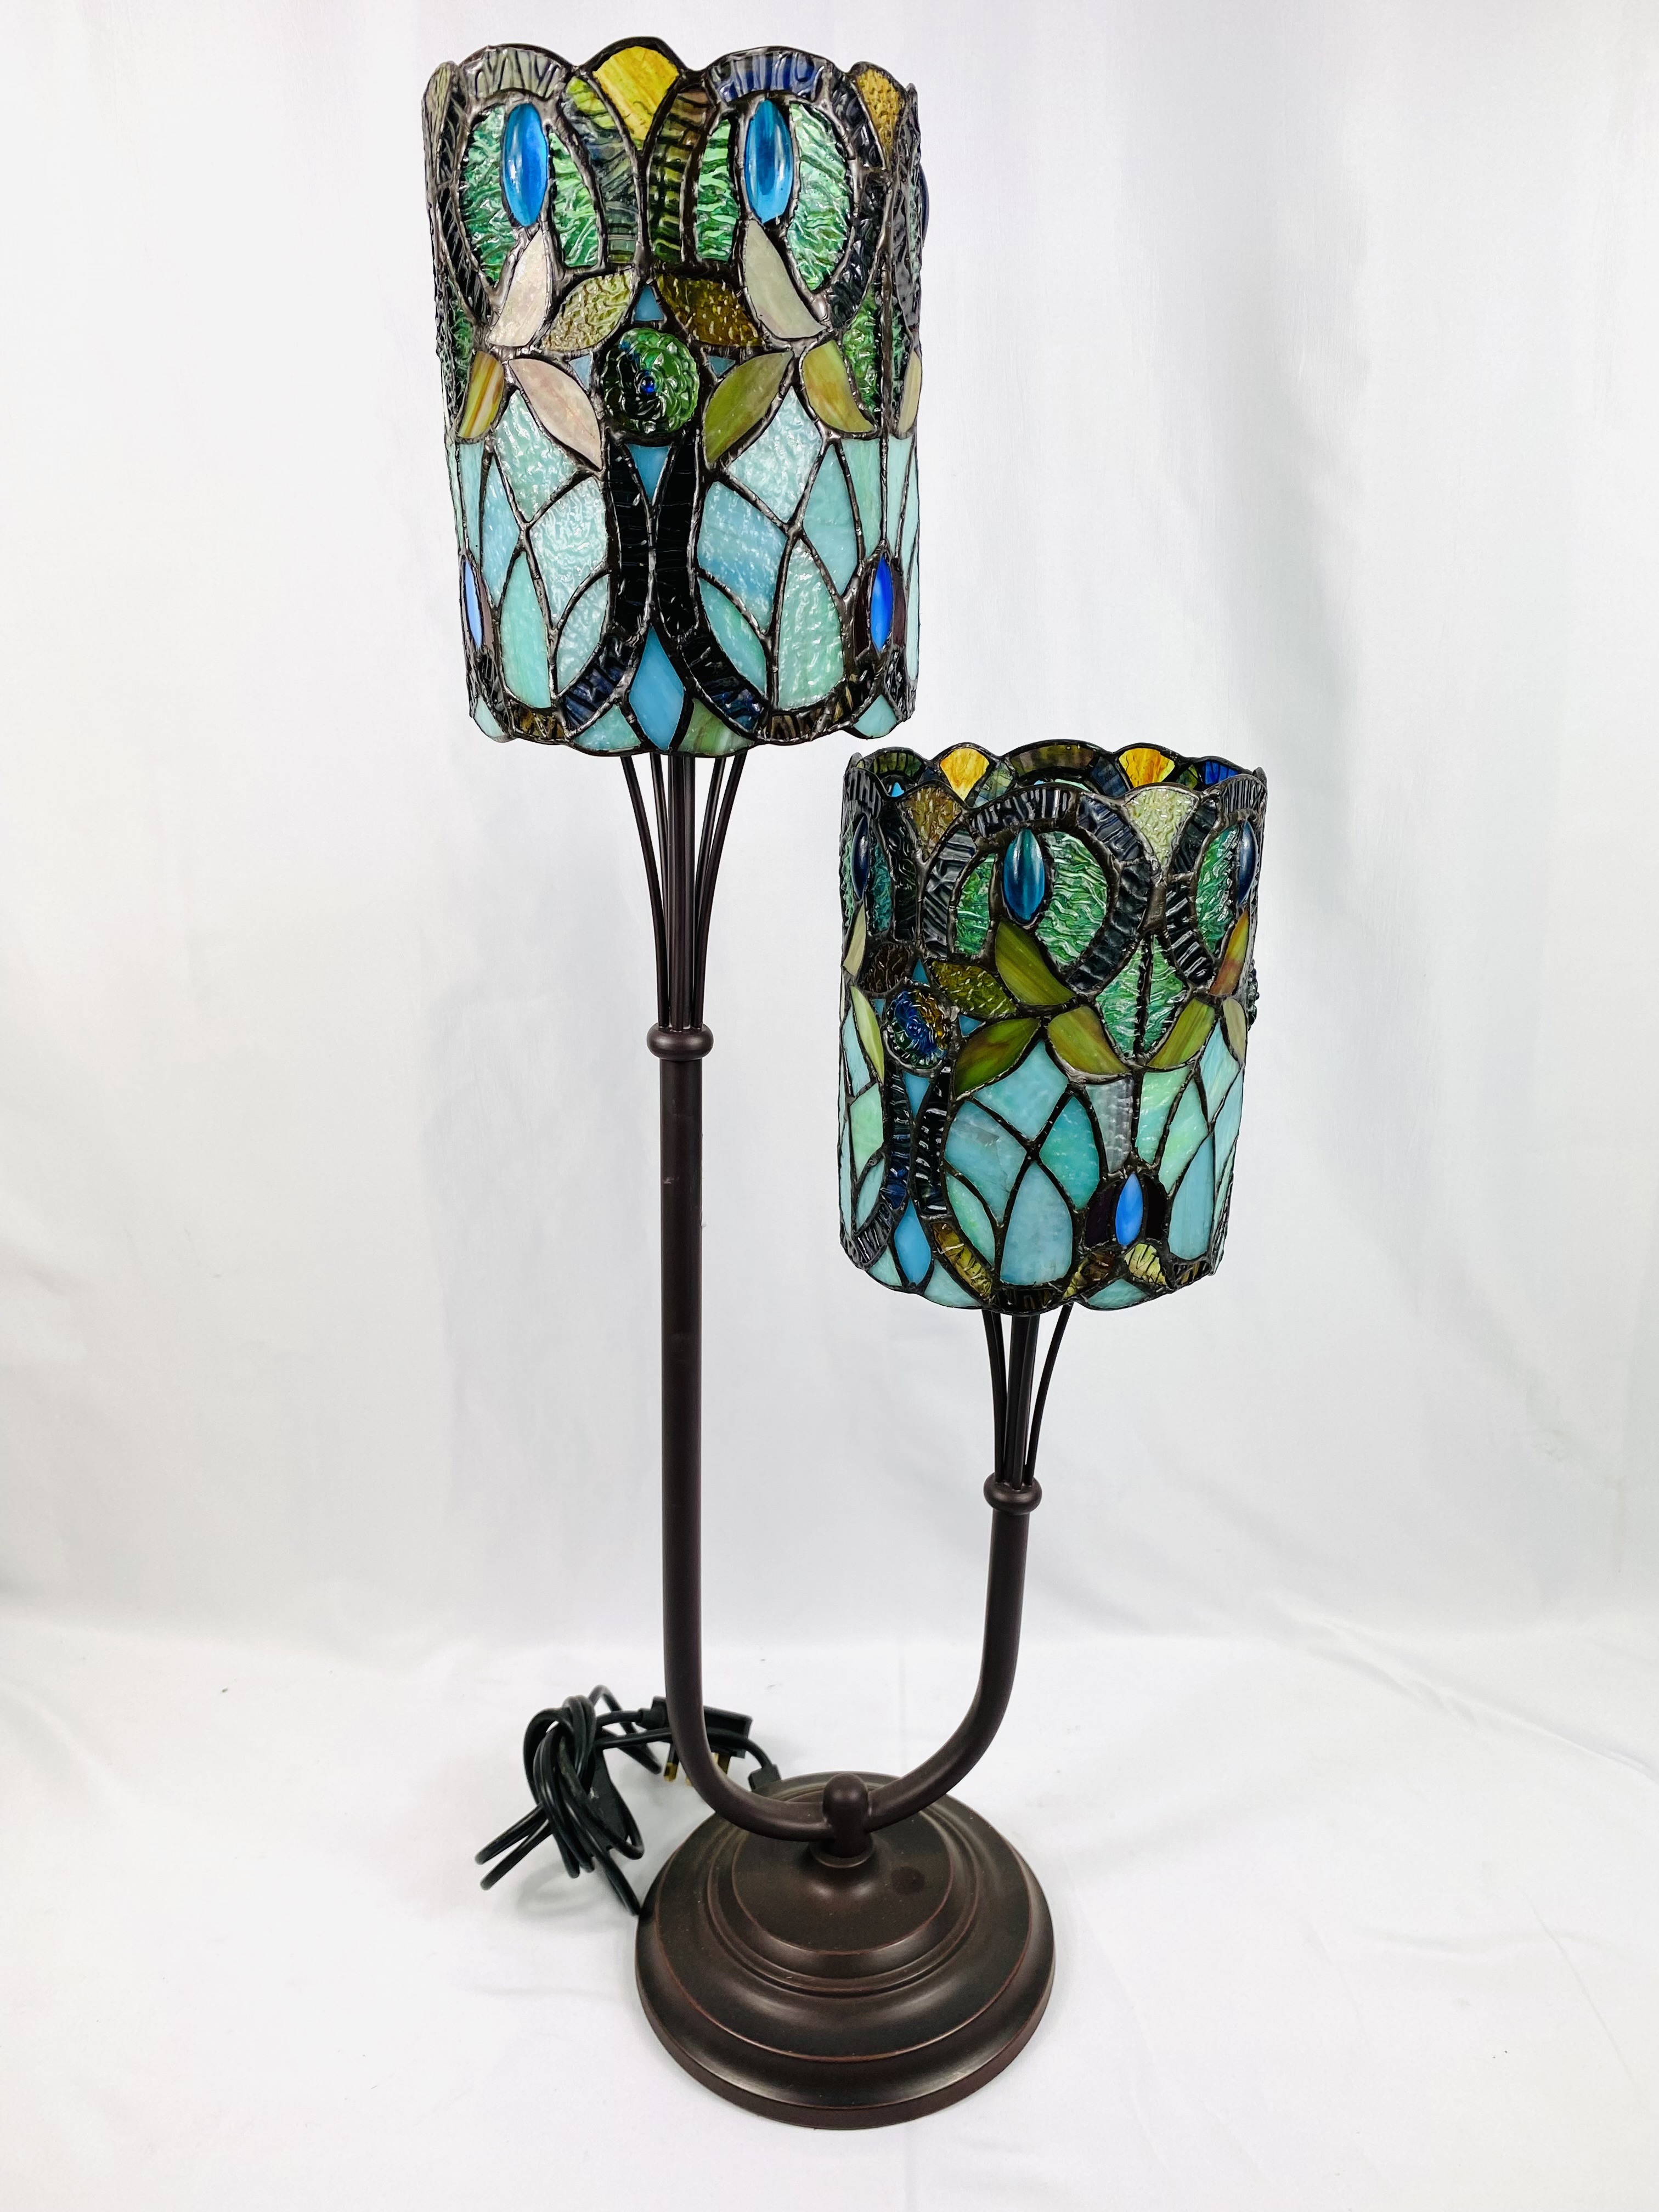 Tiffany style two branch table lamp - Image 3 of 4